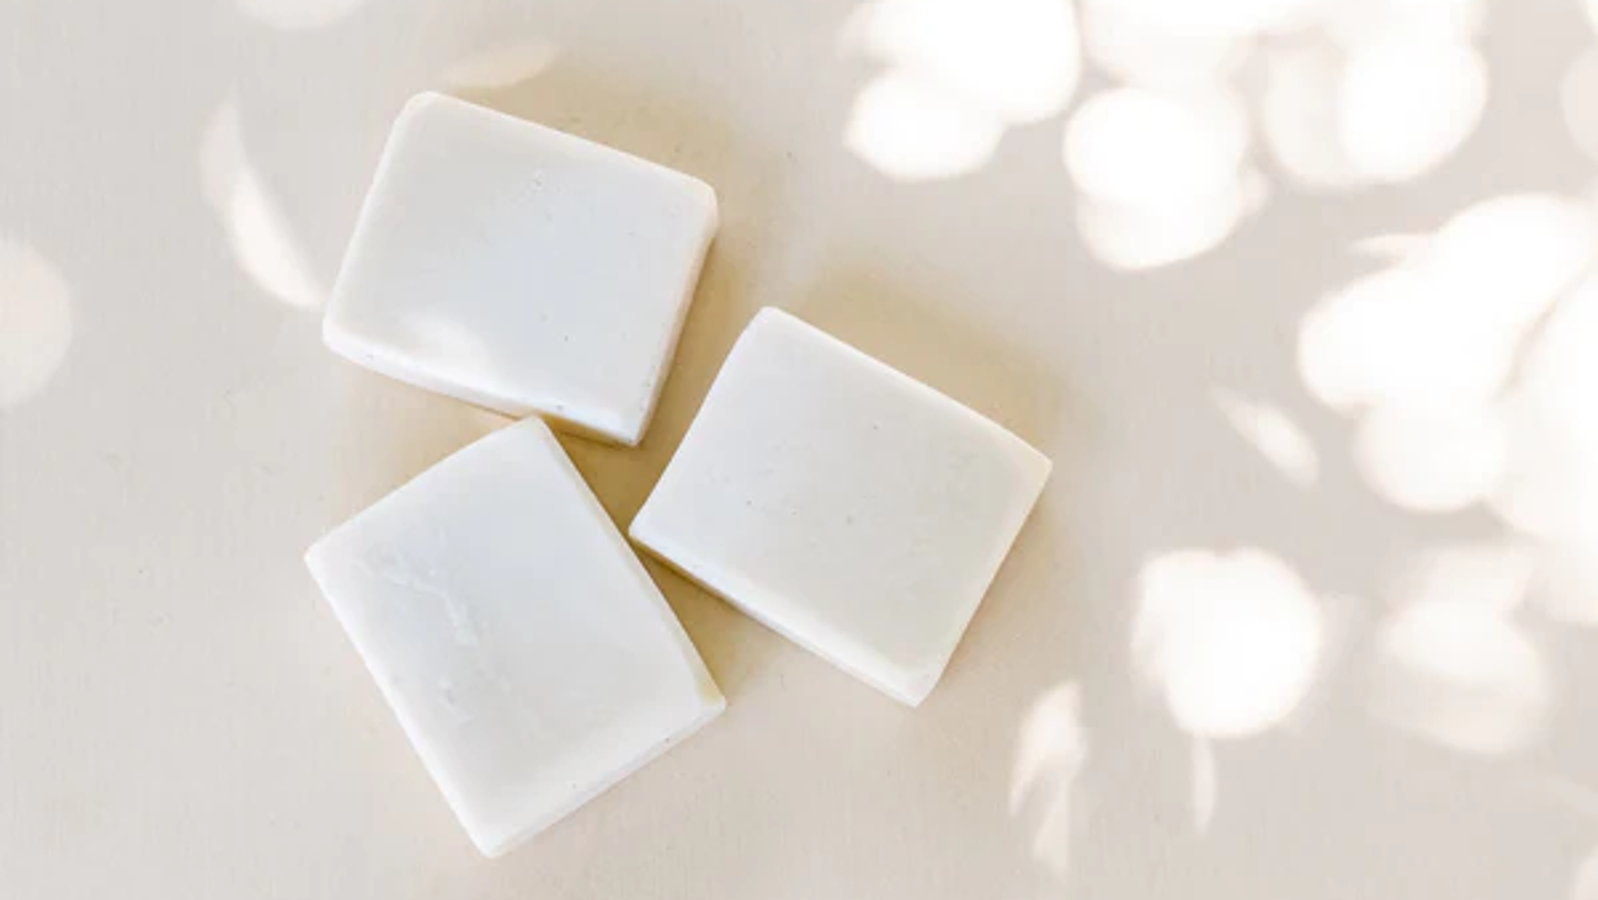 Three white bars of soap on a table